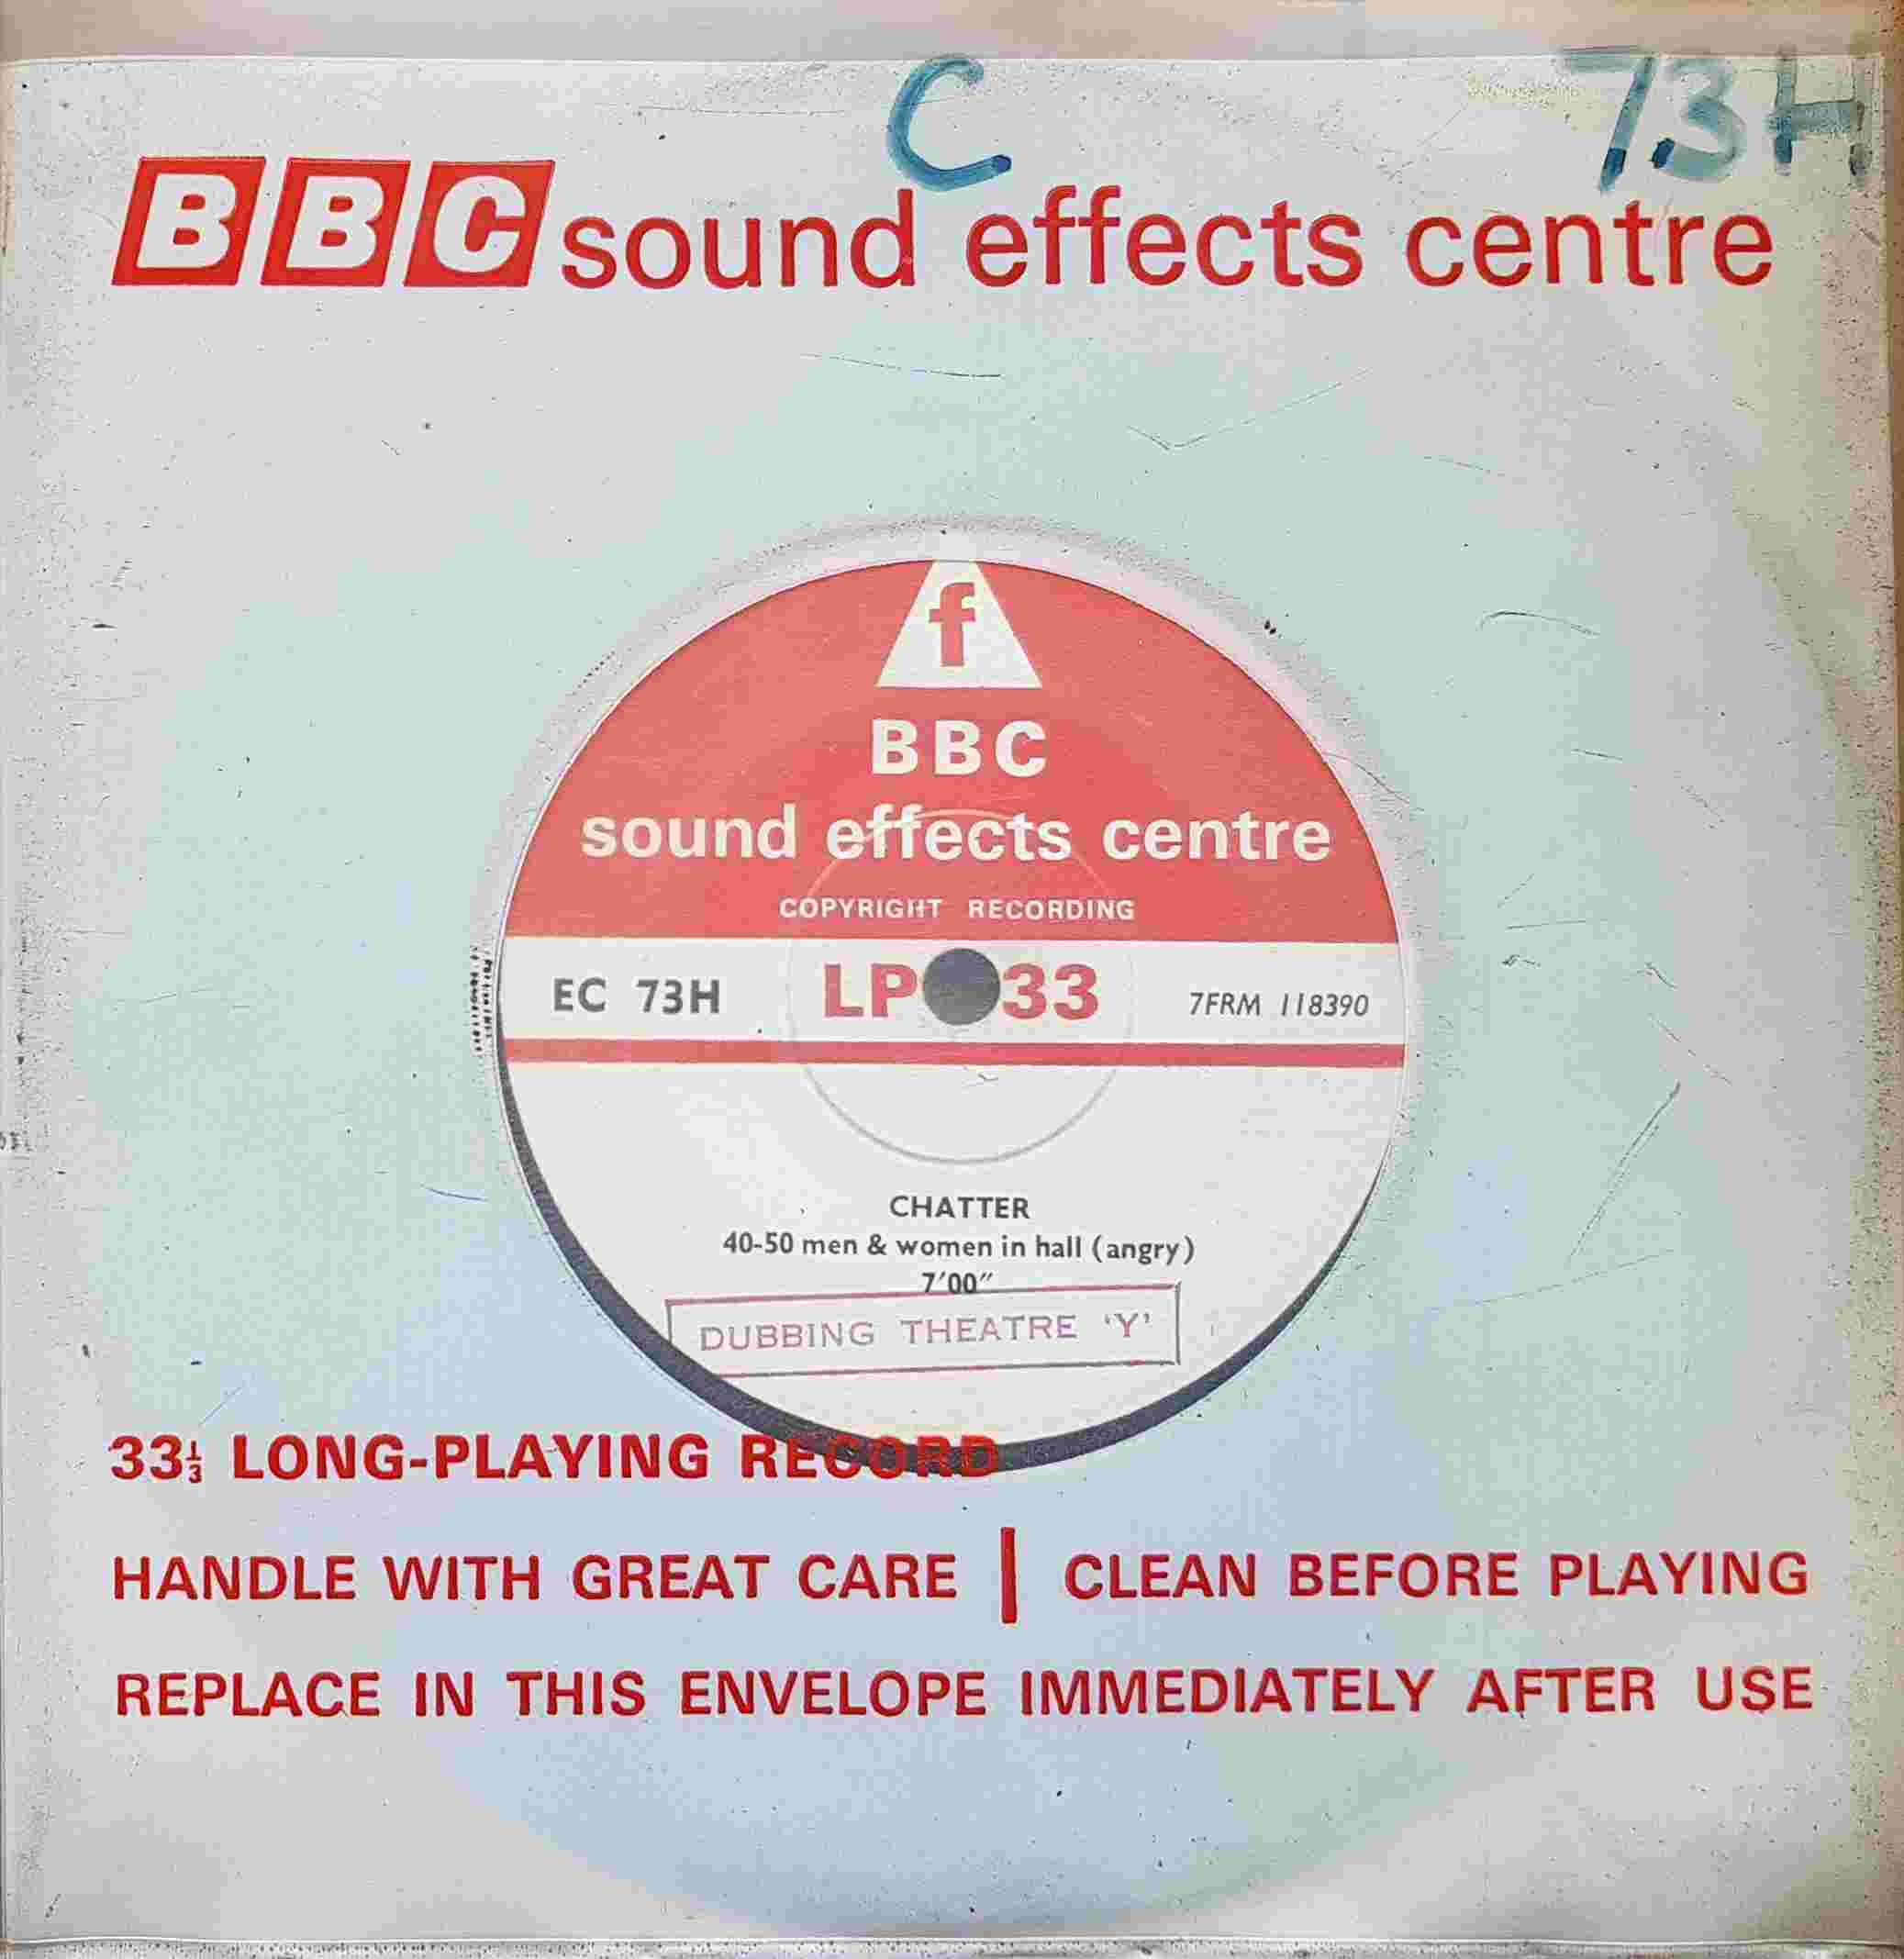 Picture of EC 73H Chatter by artist Not registered from the BBC singles - Records and Tapes library